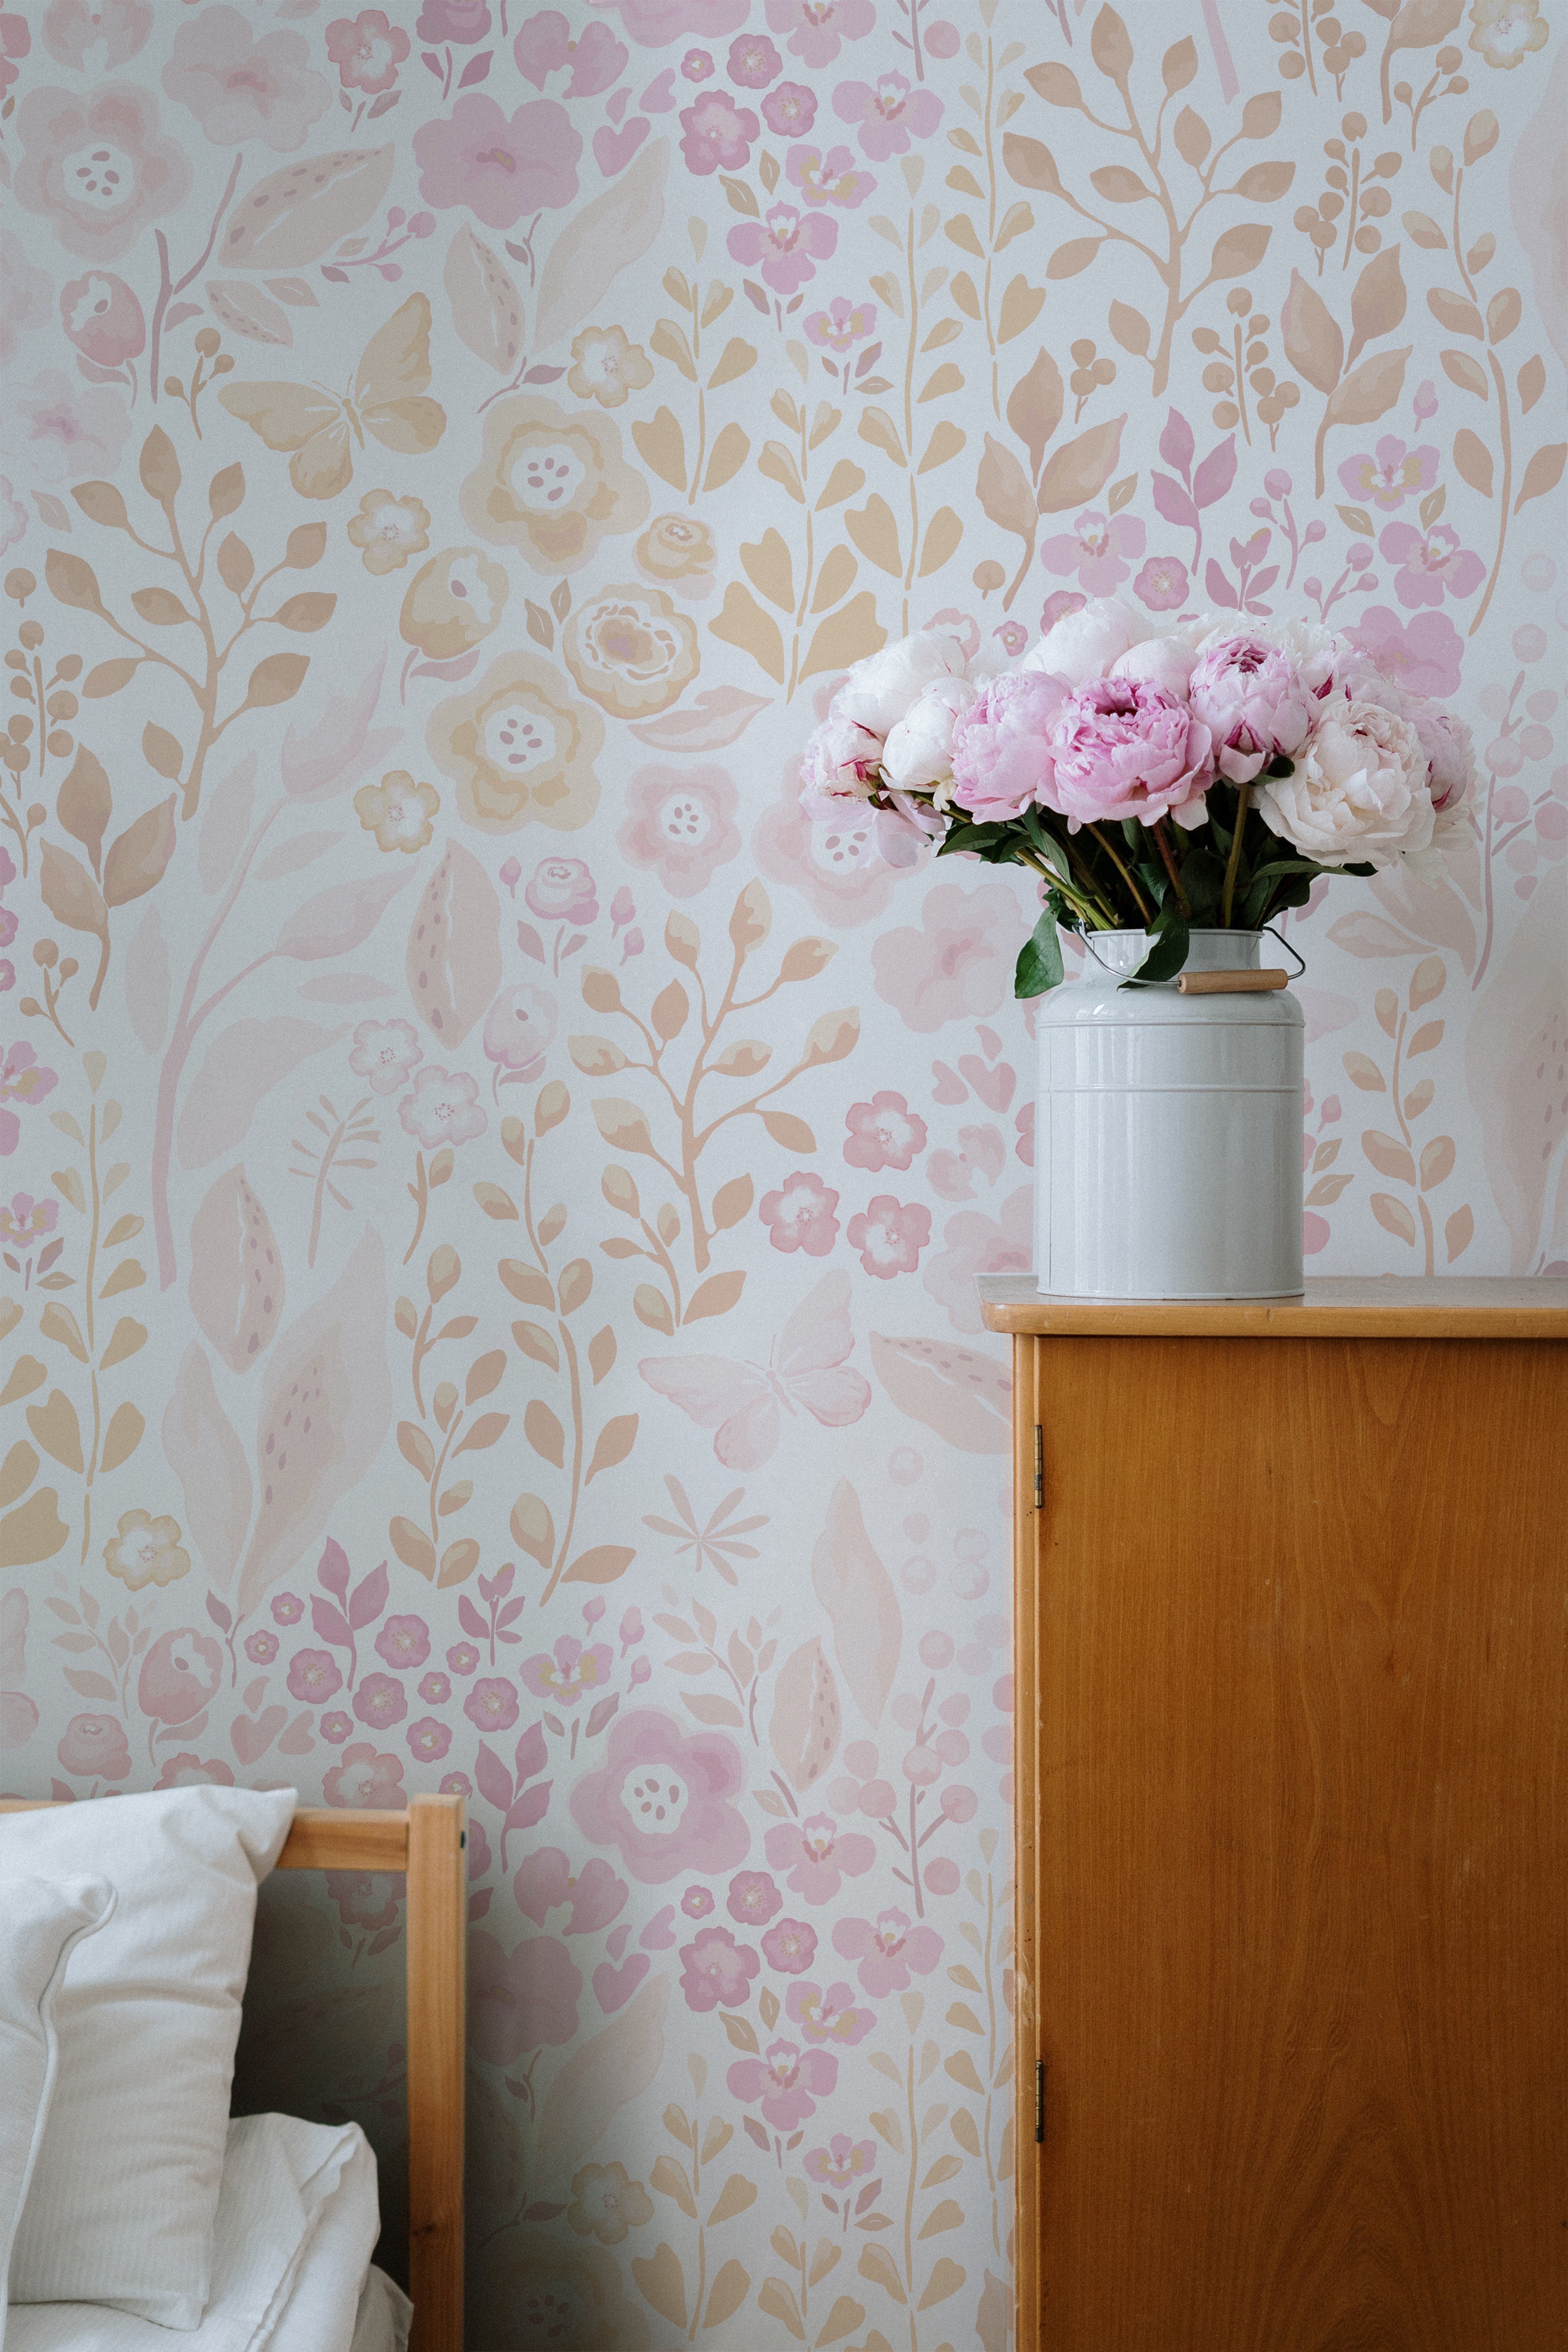 A quaint and peaceful corner of a room featuring the 'Pretty Petals Wallpaper' with soft pink and taupe floral designs. The wallpaper's delicate beauty is complemented by a fresh bouquet of pink peonies in a white vase atop a wooden cabinet, alongside a cushioned chair.